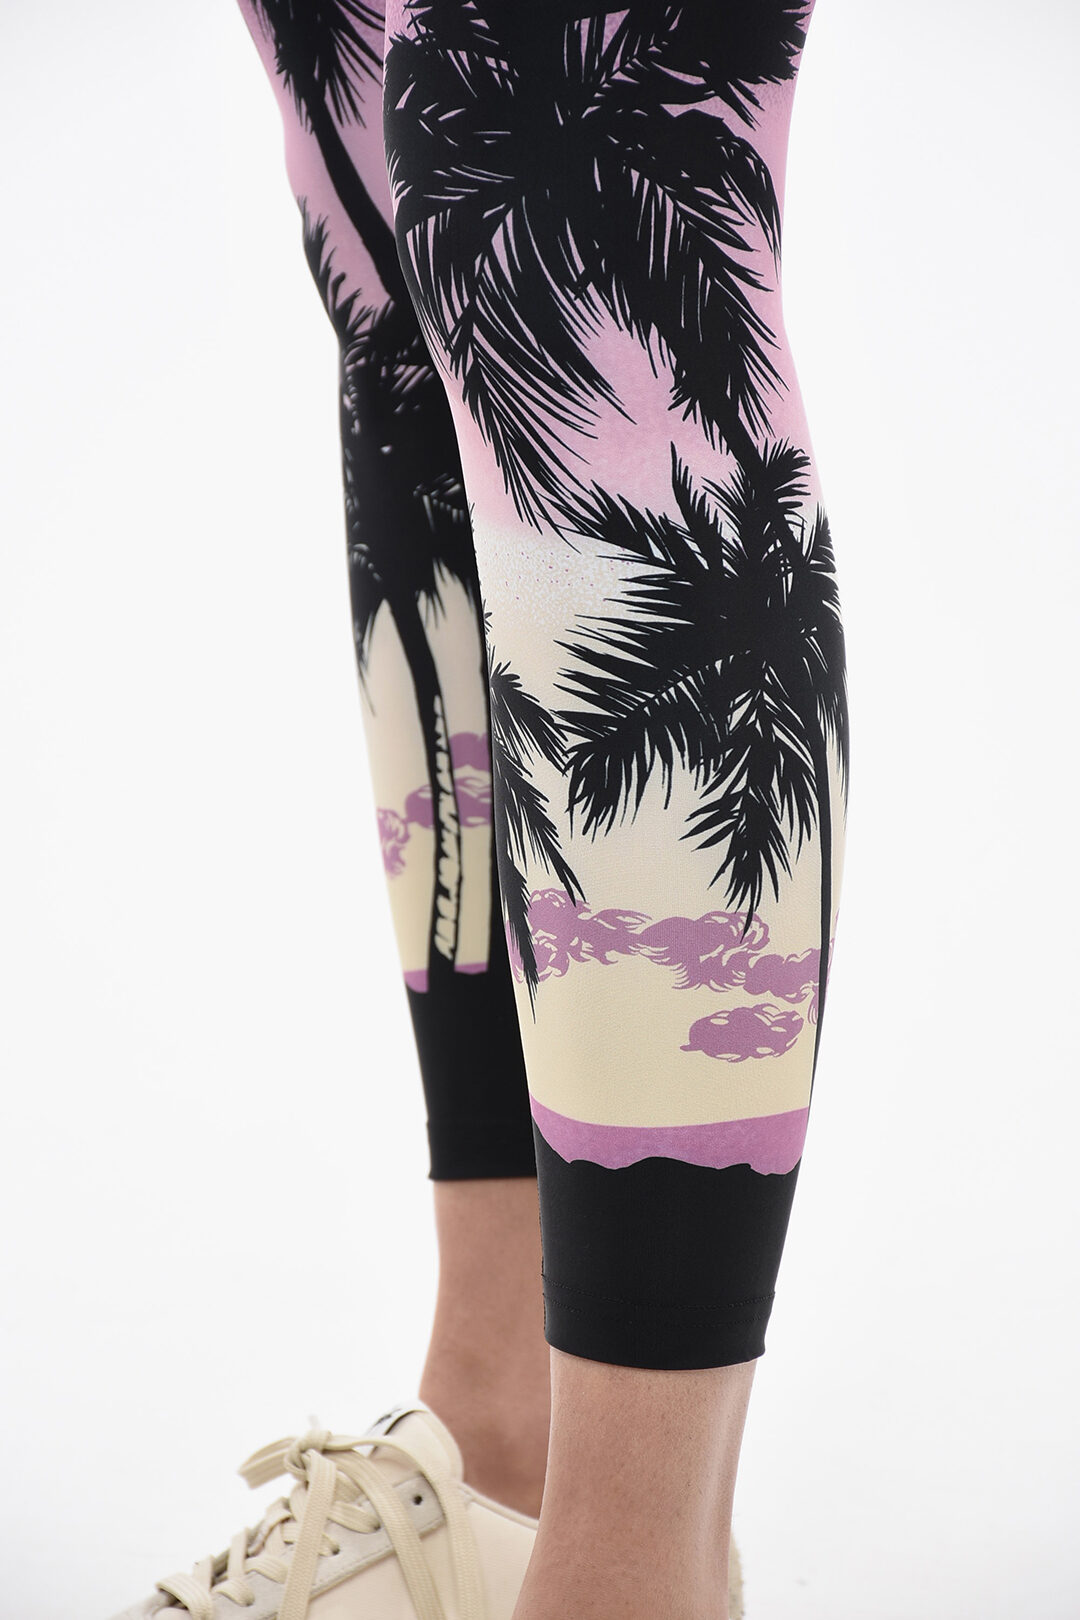 Abstract Patterned Wool Blend Leggings